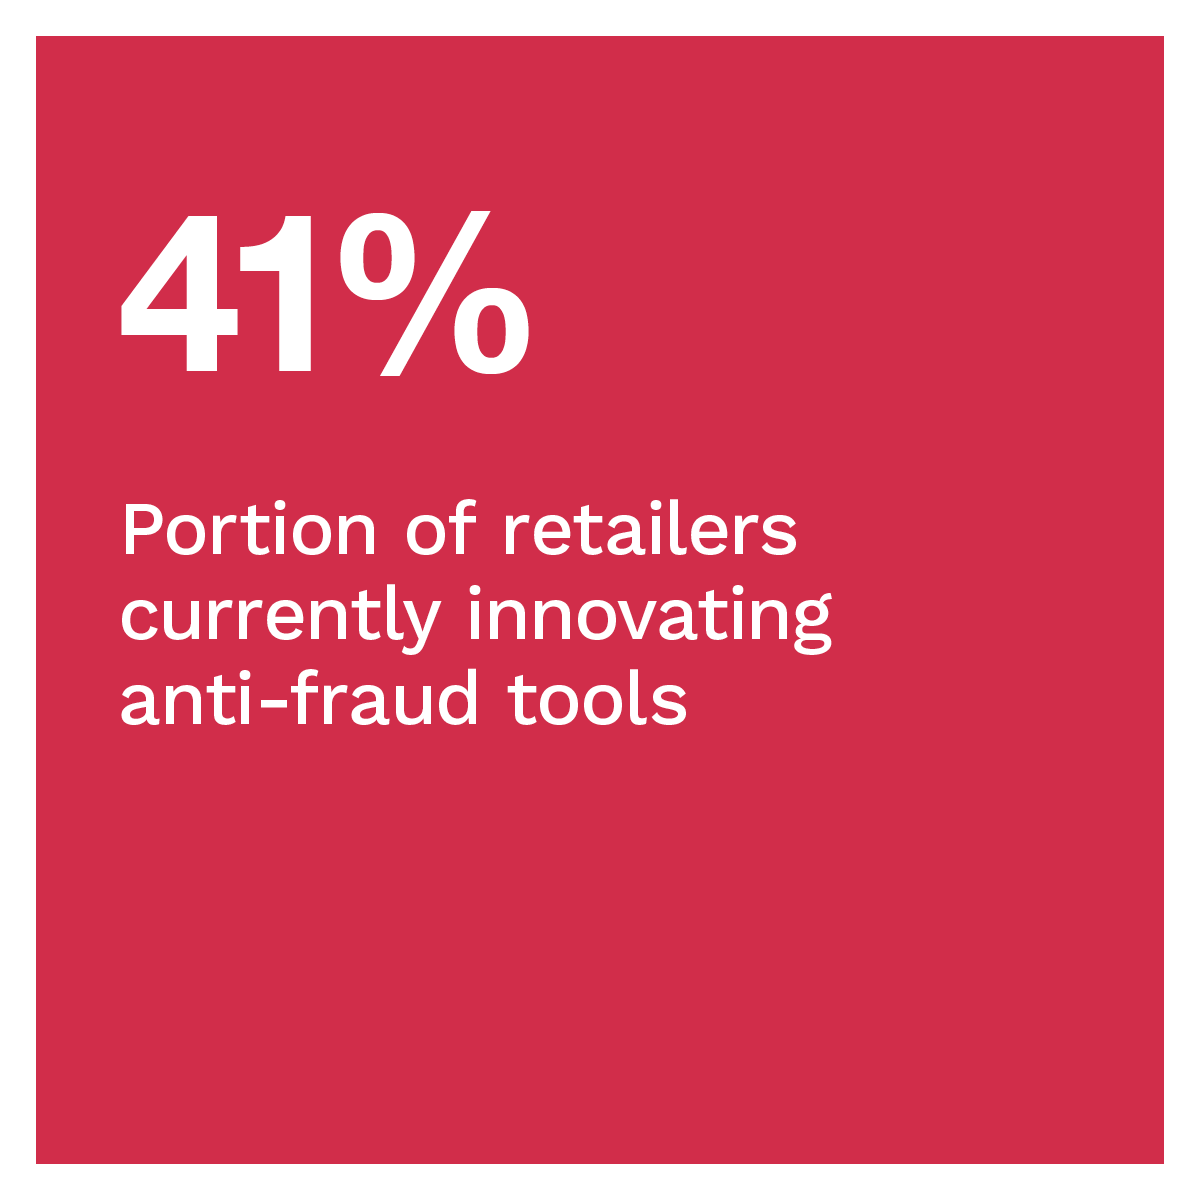 41%: Portion of retailers currently innovating anti-fraud tools